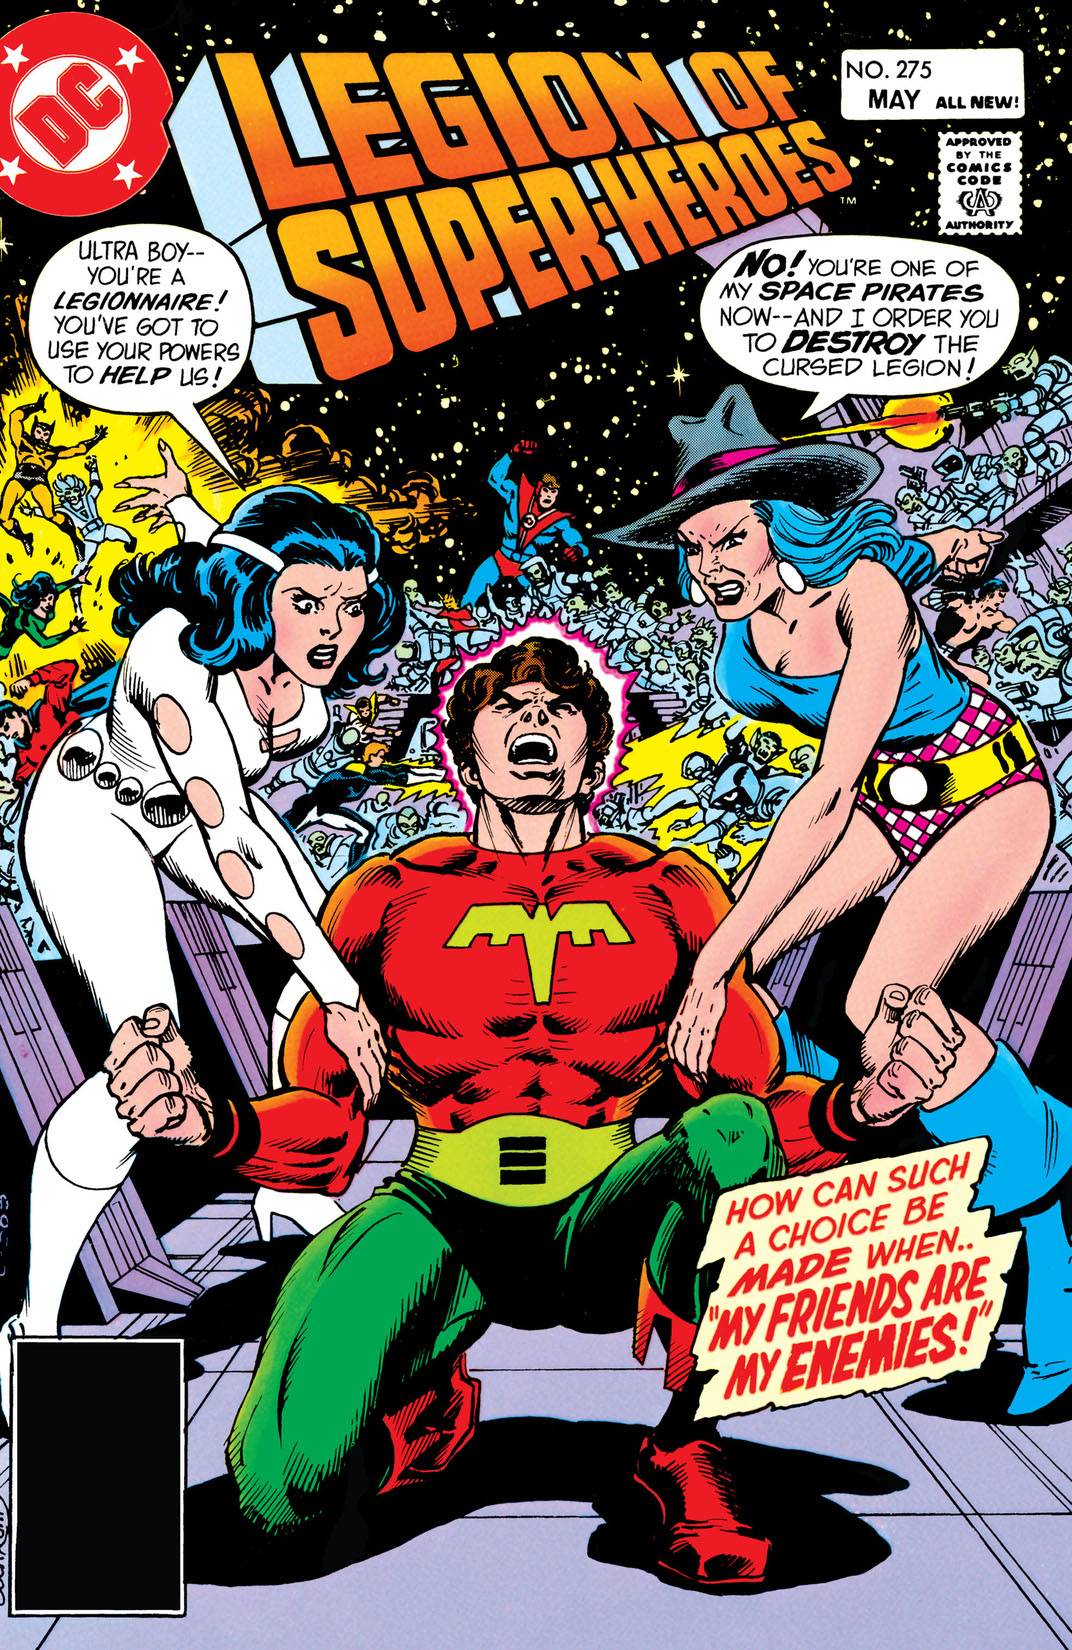 The Legion of Super-Heroes (1980-) #275 preview images